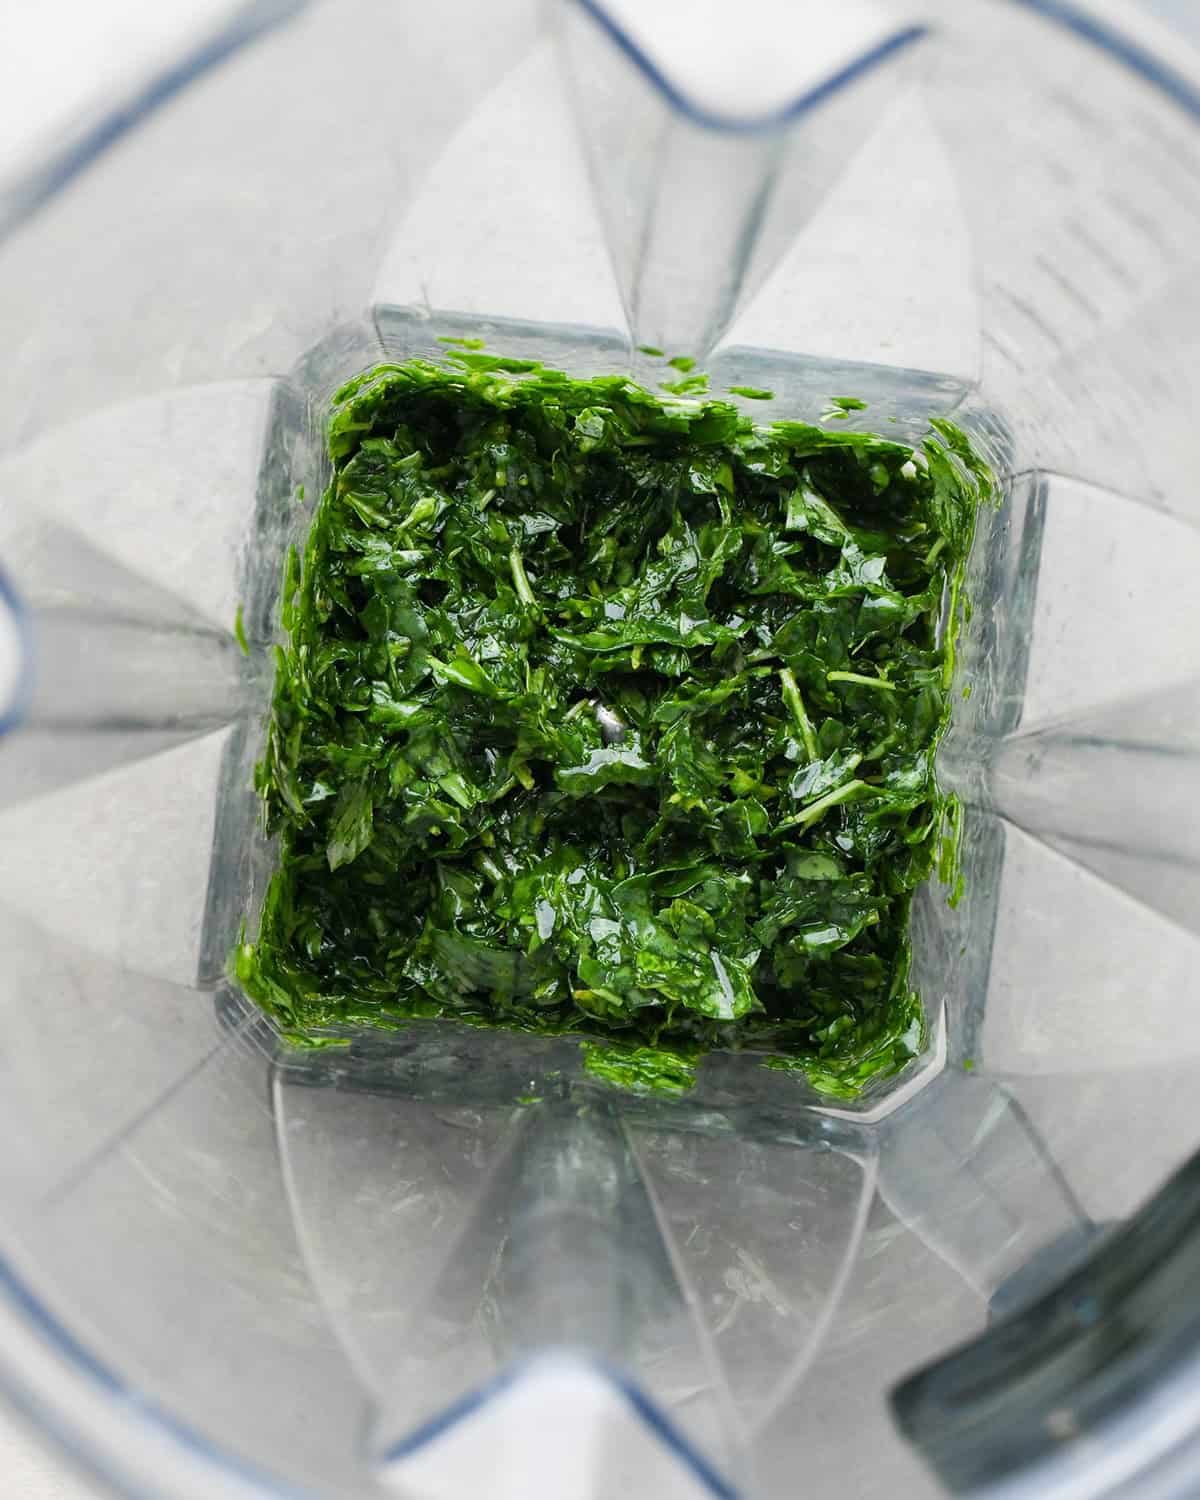 How to Make Pesto Sauce - basil leave and olive oil blended in a blending container